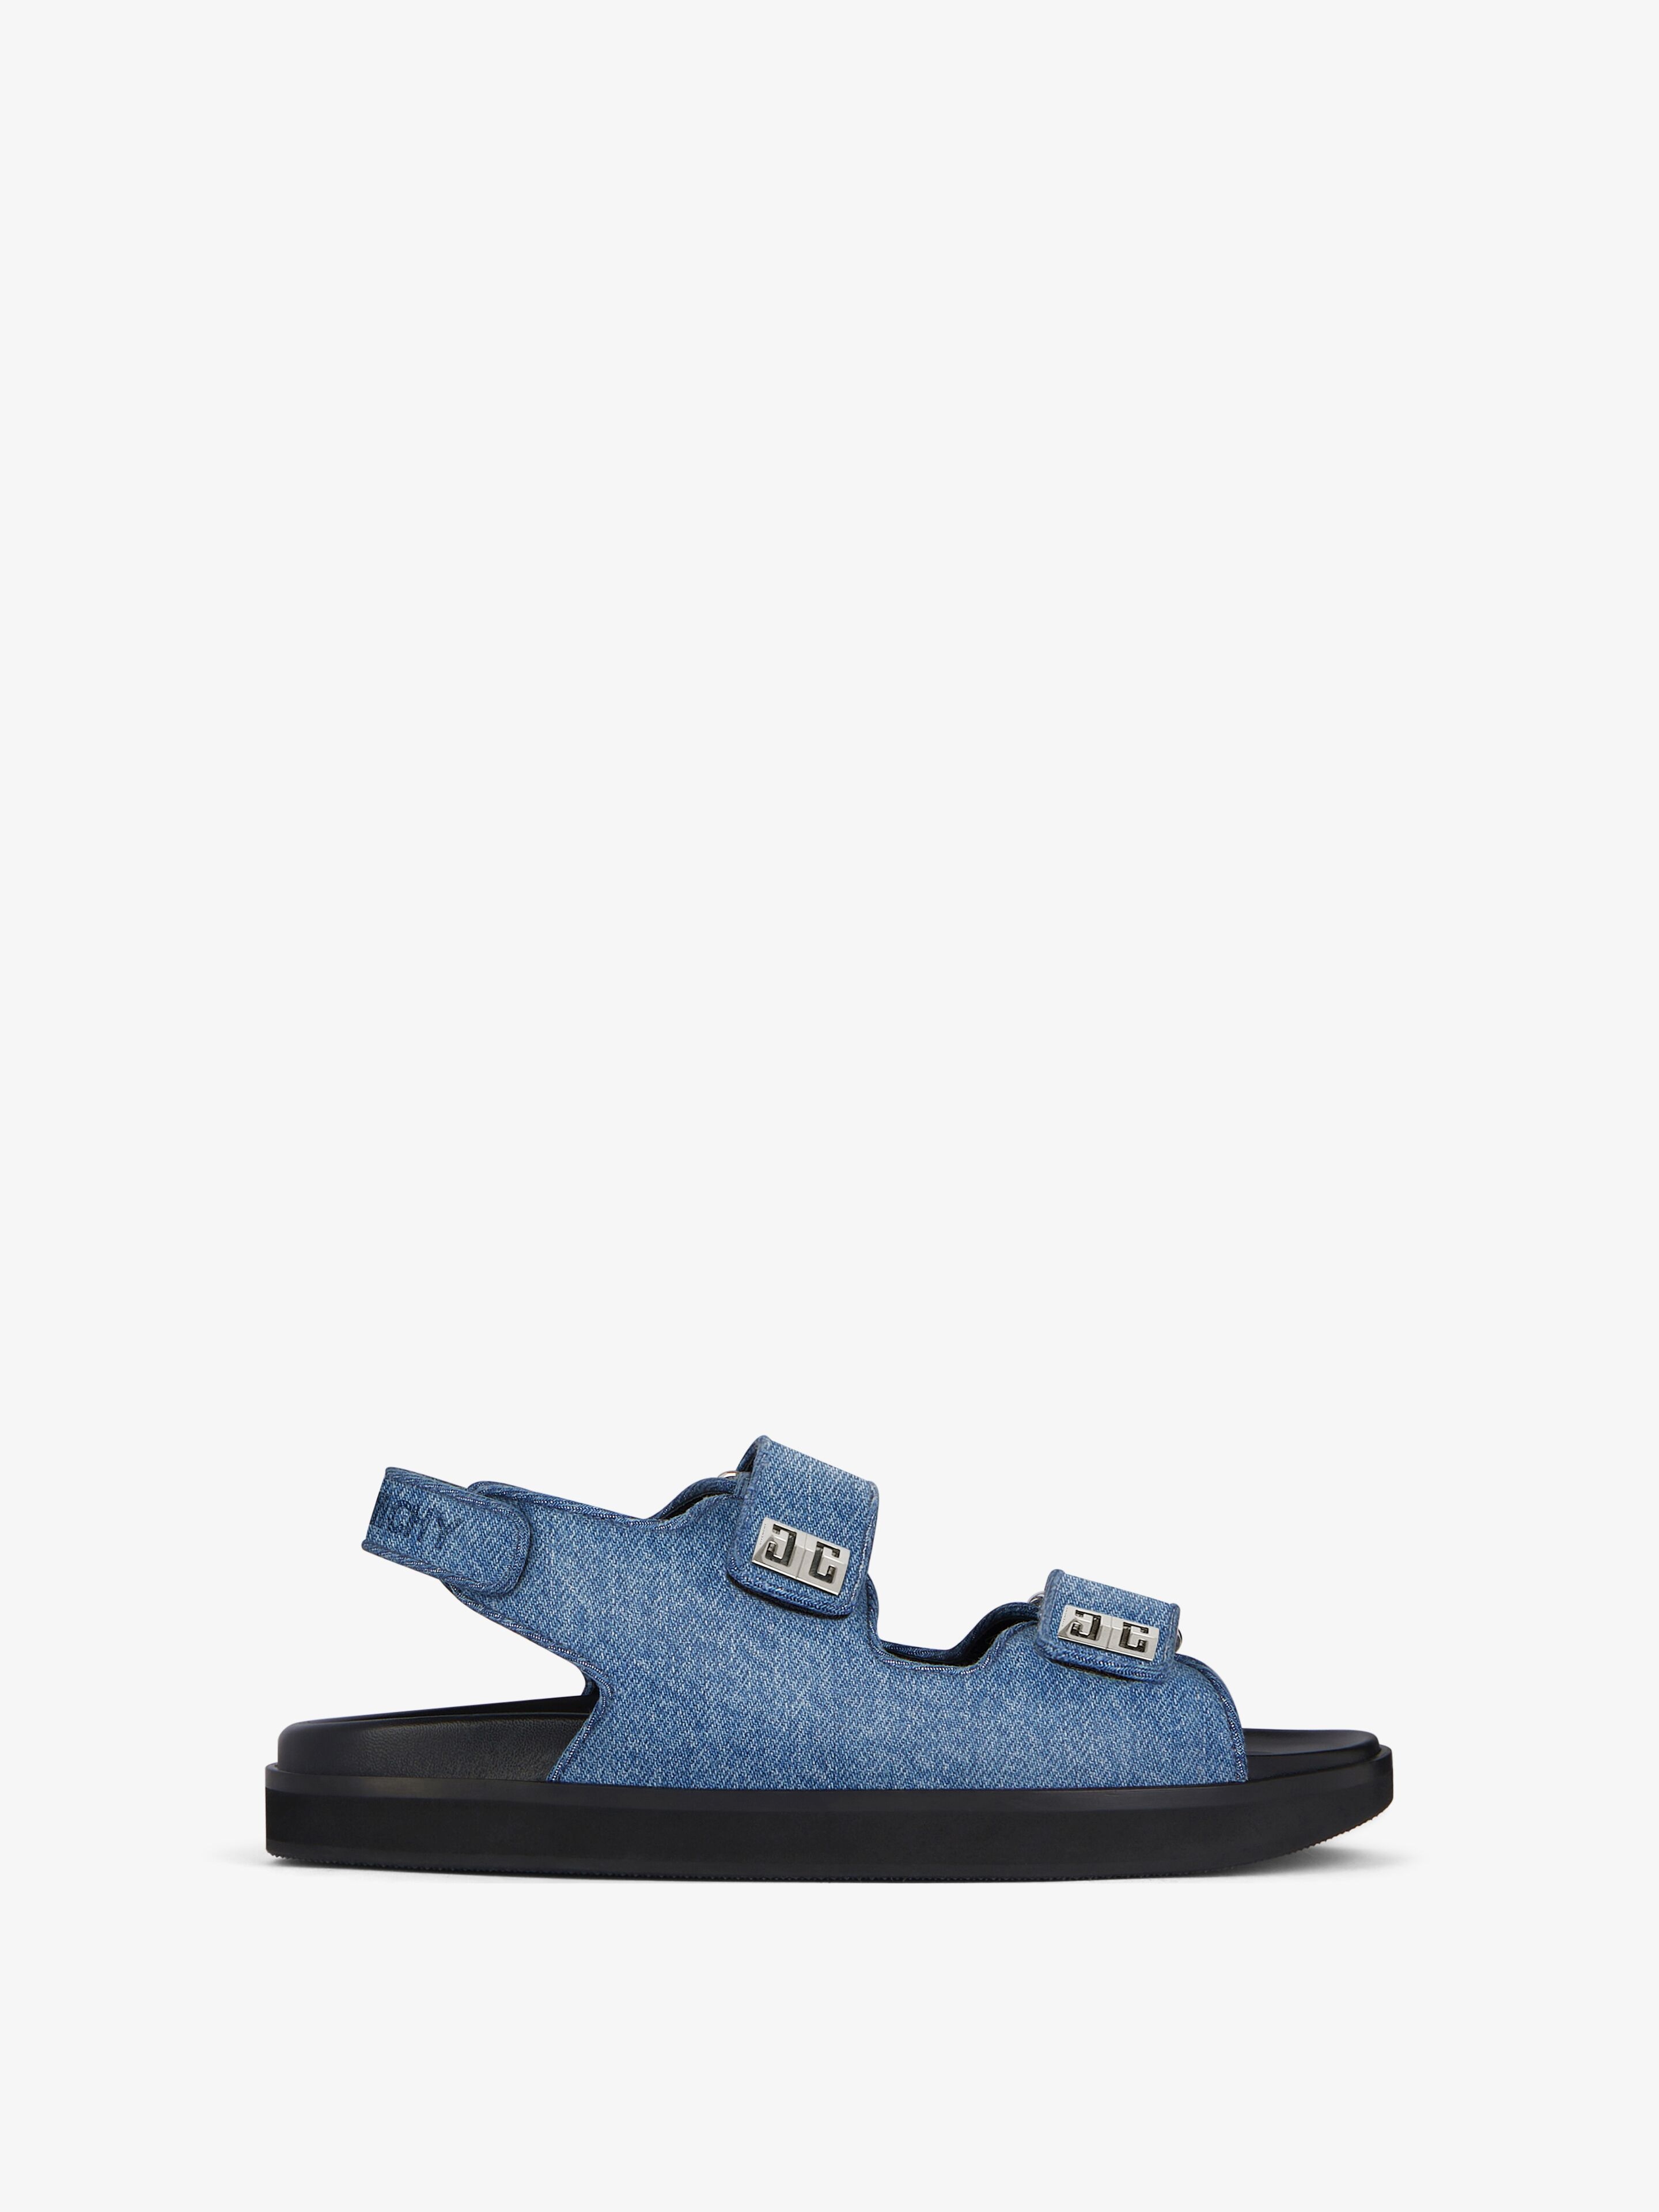 4G sandals in denim | Givenchy US | Givenchy